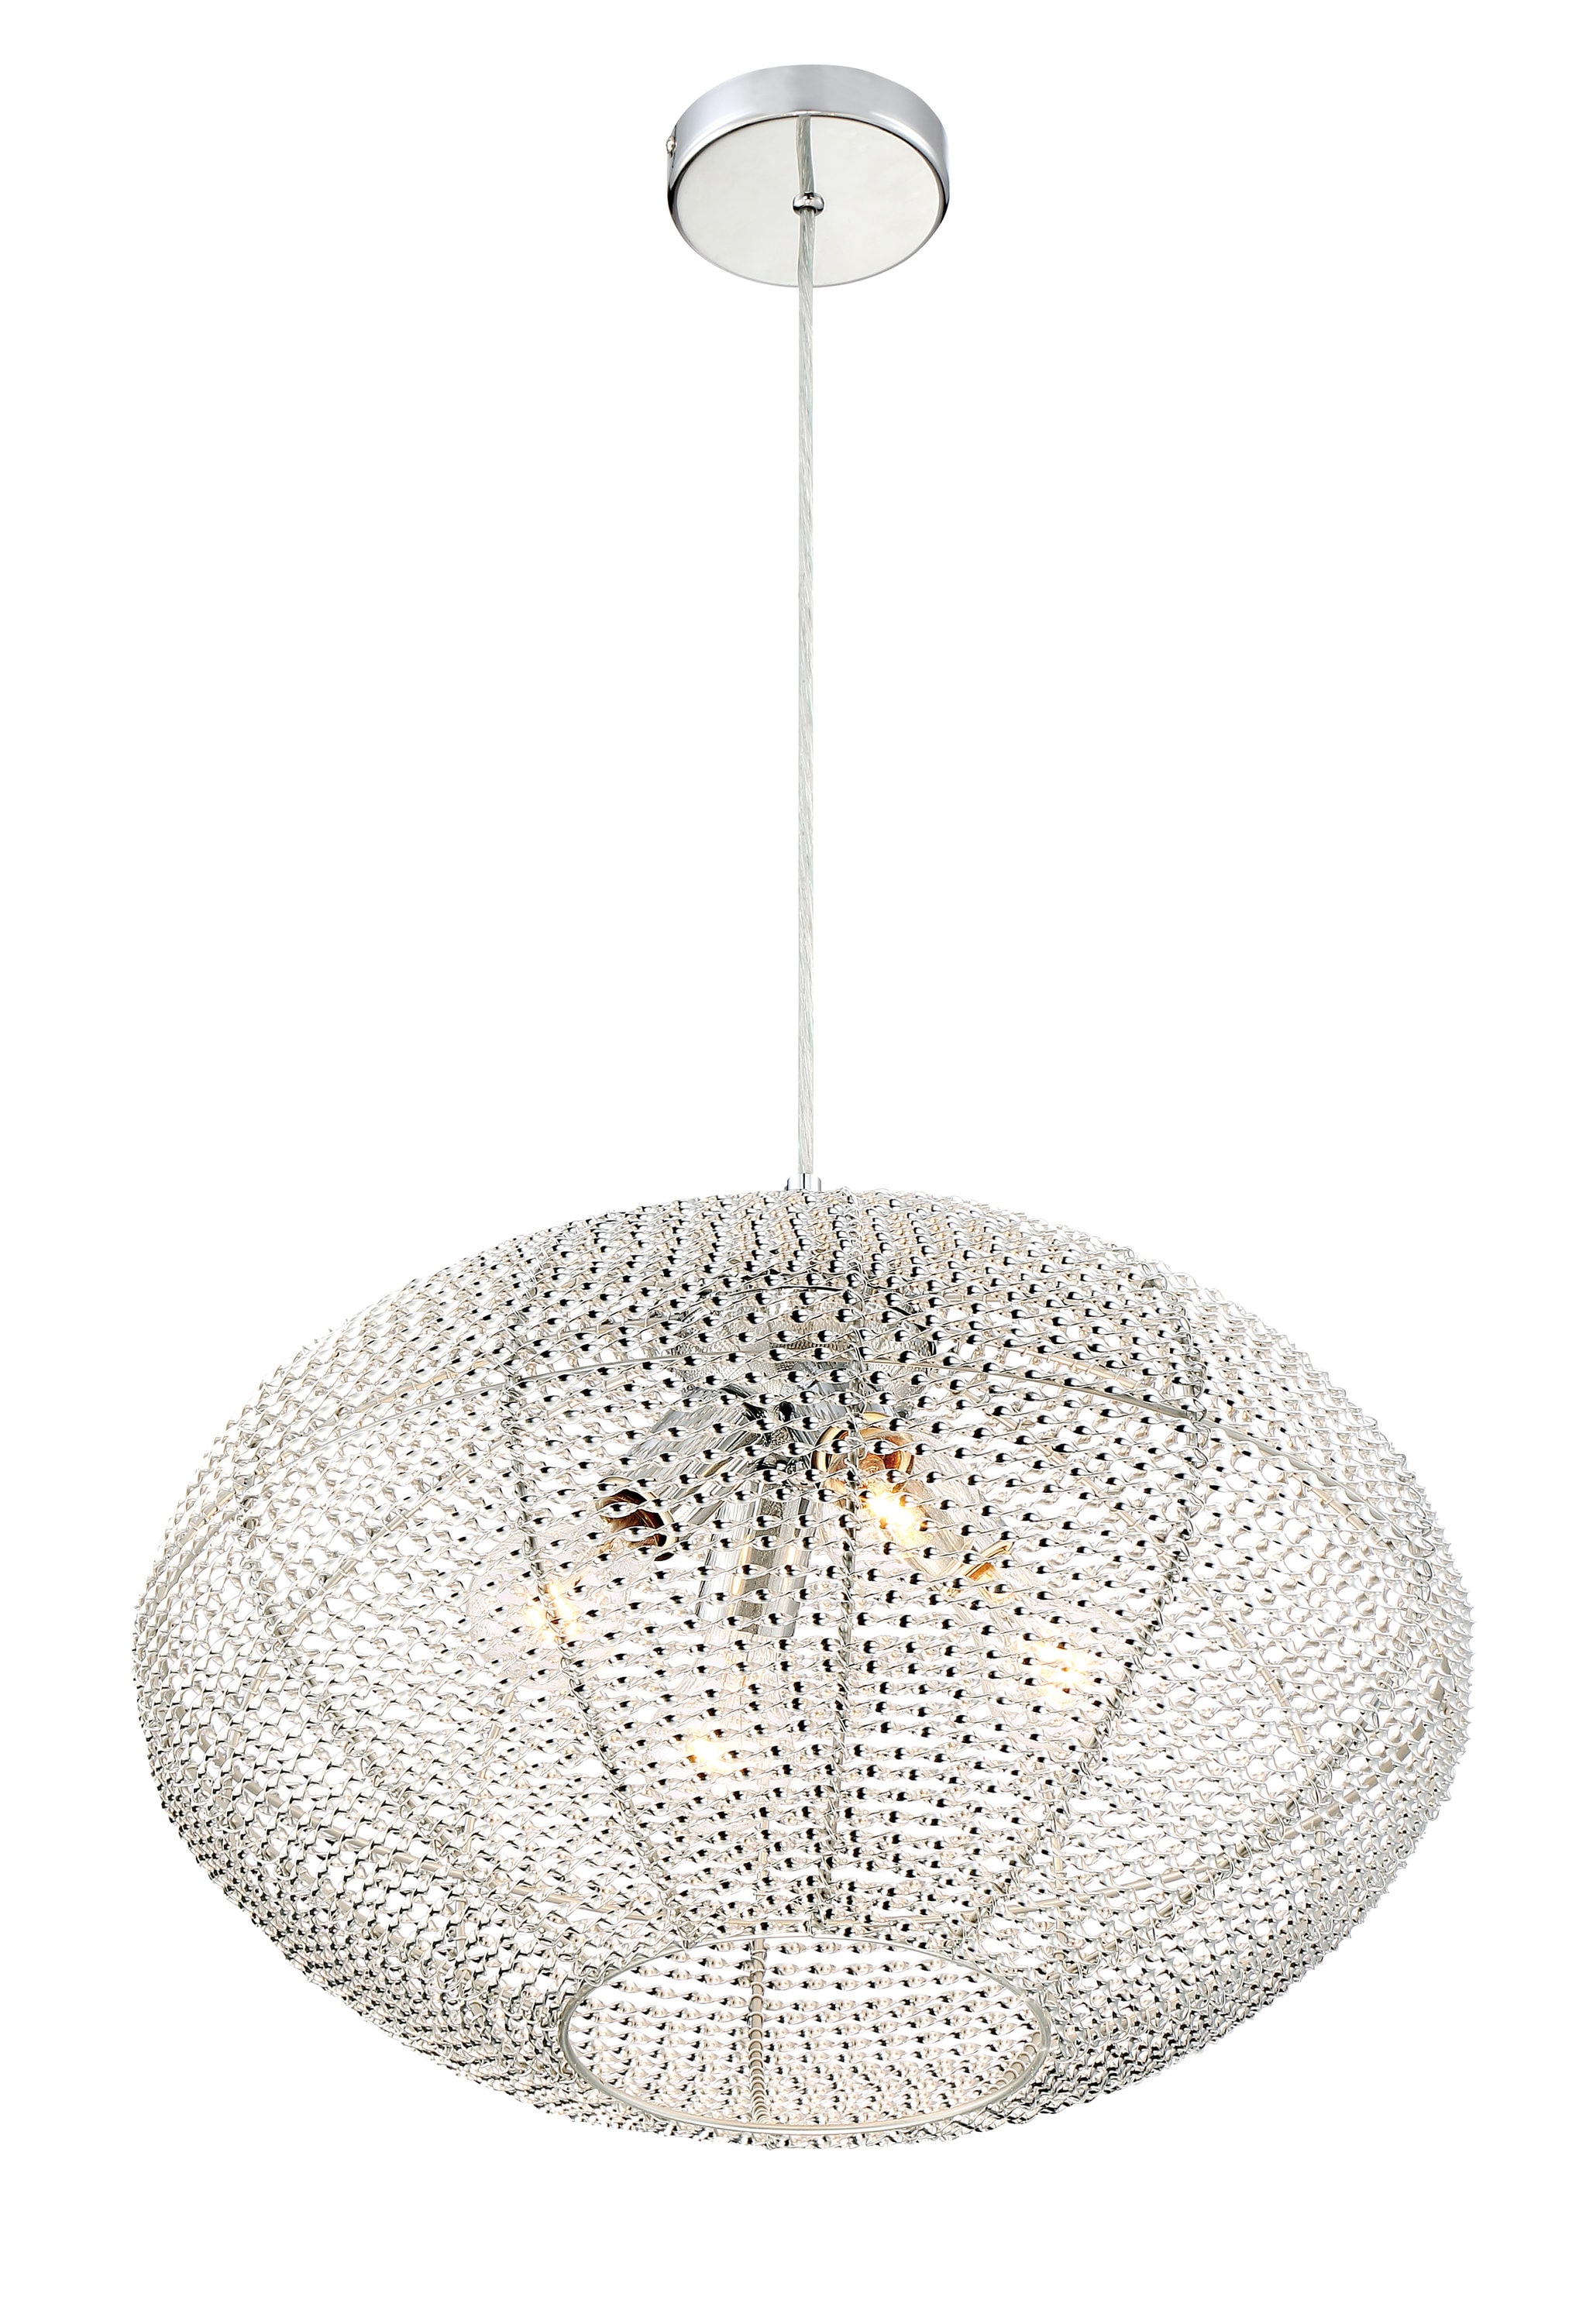 Lighting Polished at in Tango Hanging Transitional Light Quoizel Pendant the Pendant 4-Light Chrome department Dome